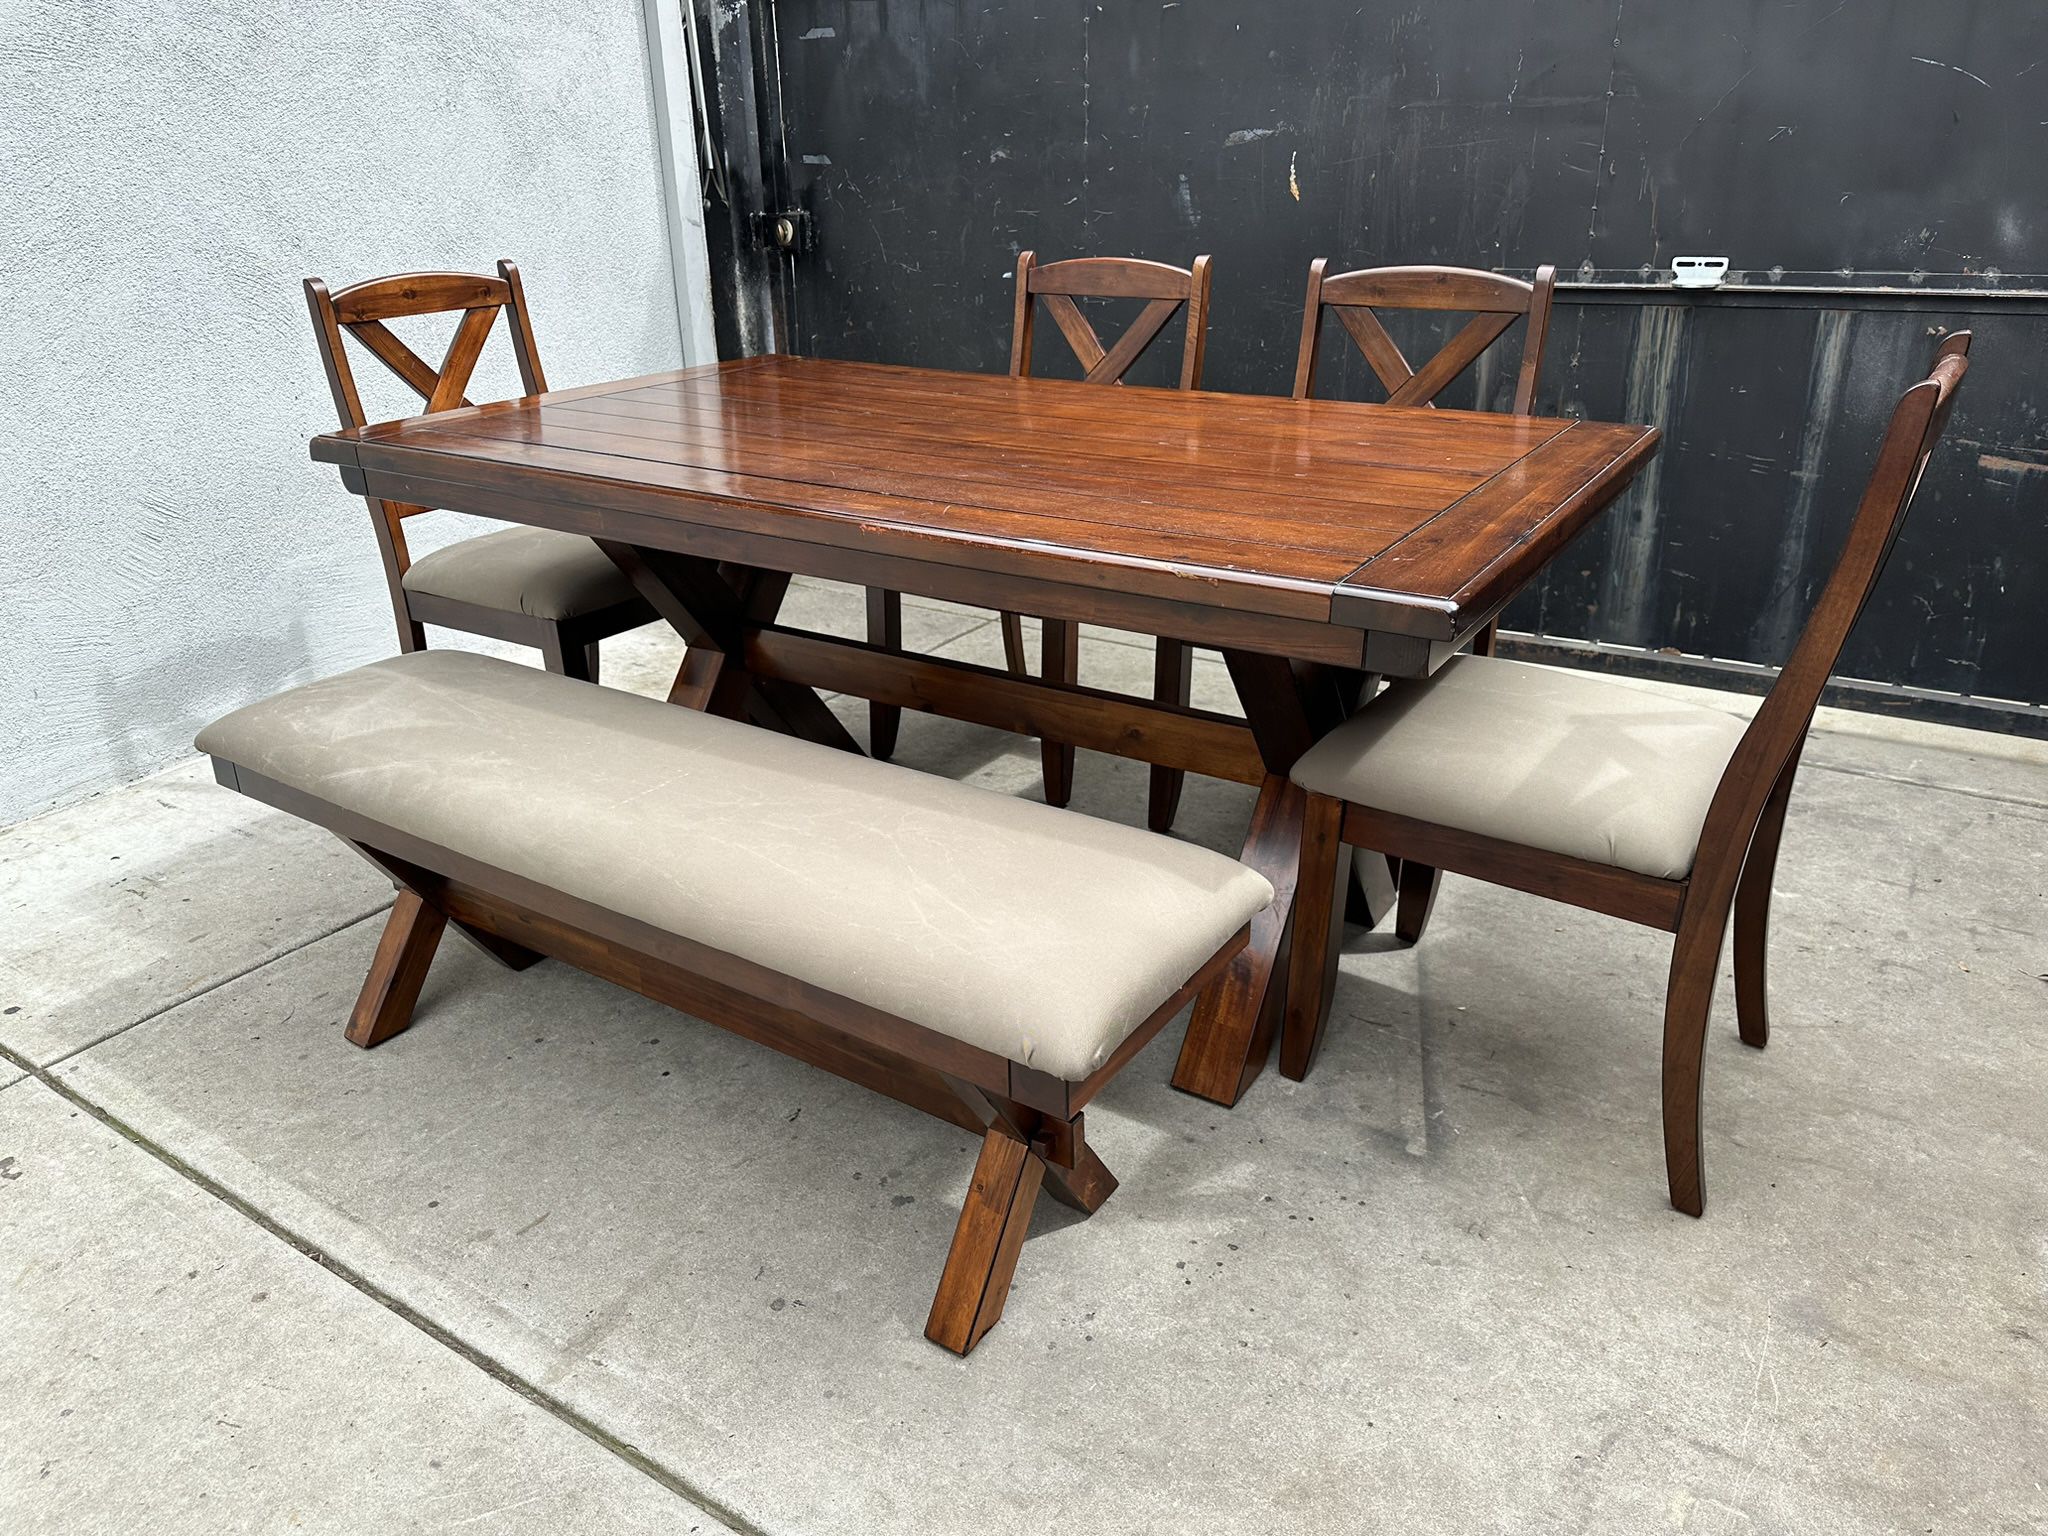 Gorgeous Brown Dining room Table Set